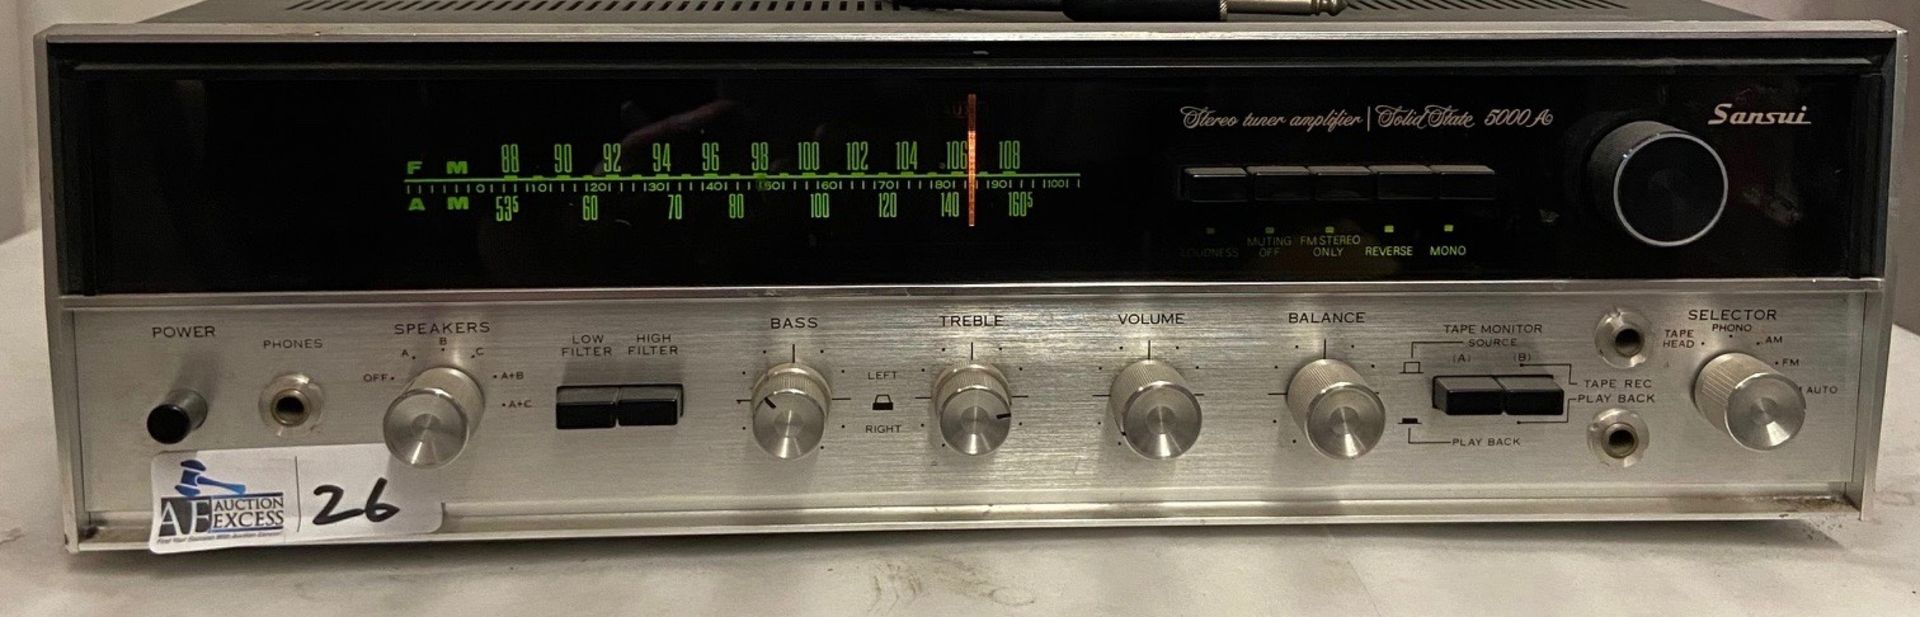 SANSUI 5000A RECEIVER STEREO